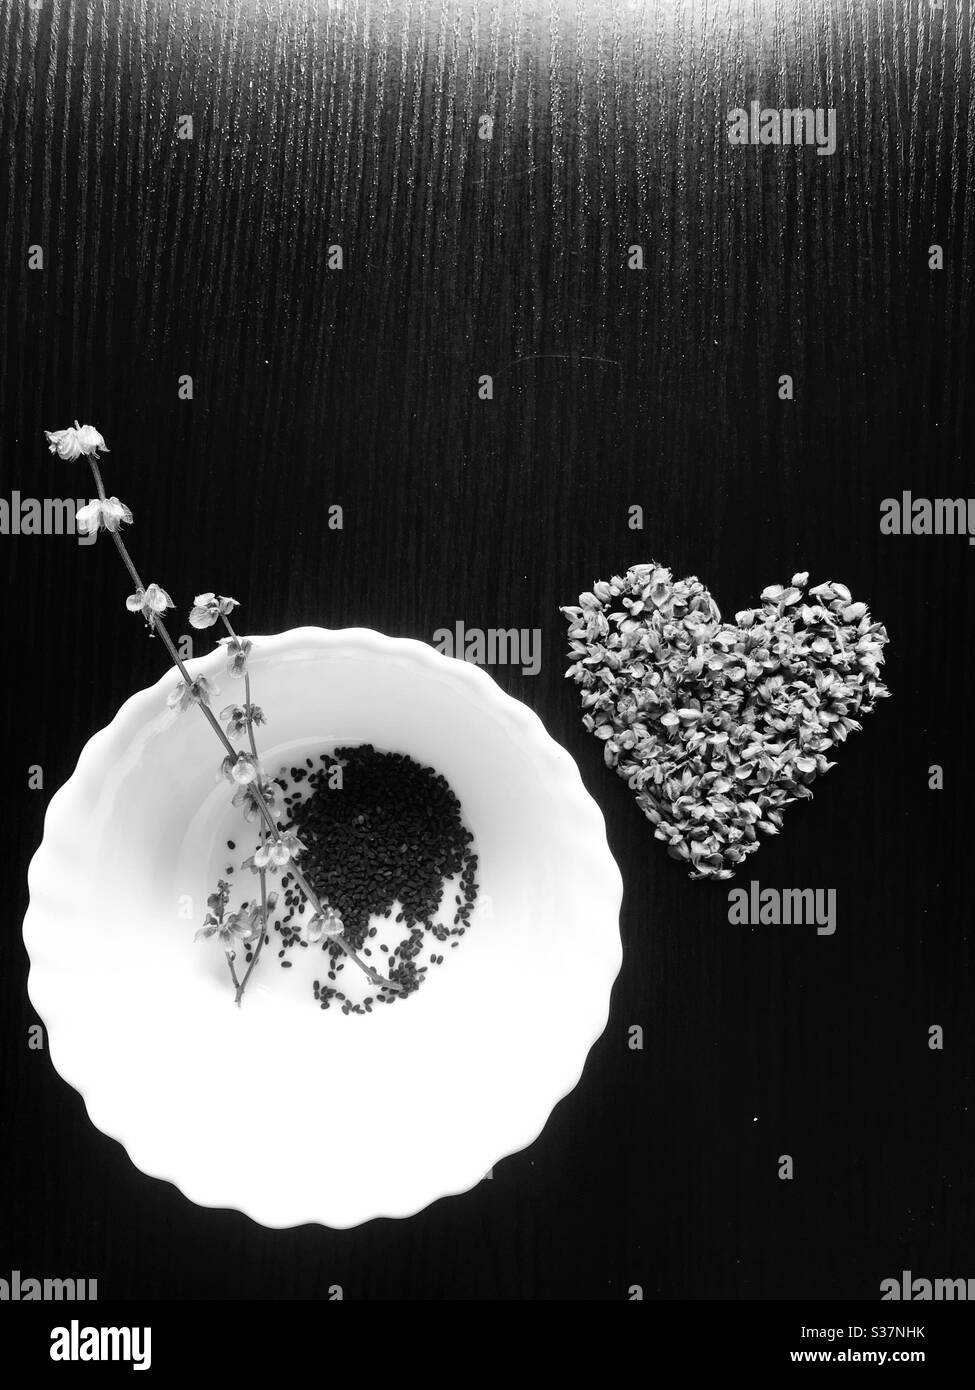 Heart shape dry flower of medicinal holy basil aka Thulasi / tulsi, basil seeds in a white ceramic bowl with 2 stalk of dried flowers- created for time pass Stock Photo